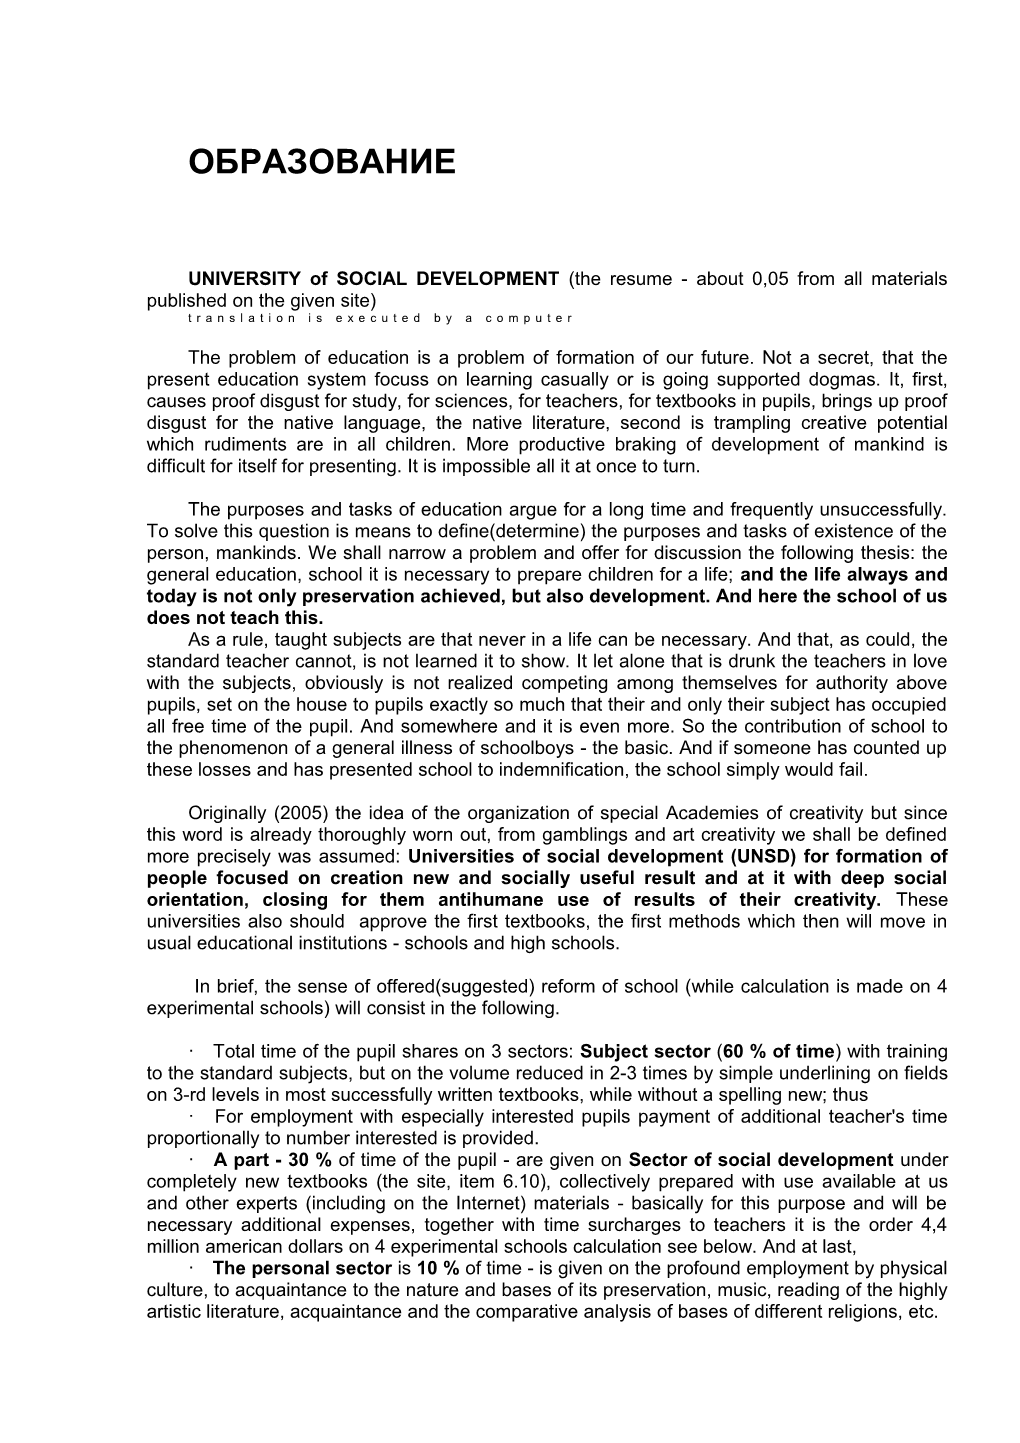 UNIVERSITY of SOCIAL DEVELOPMENT (The Resume - About 0,05 from All Materials Published